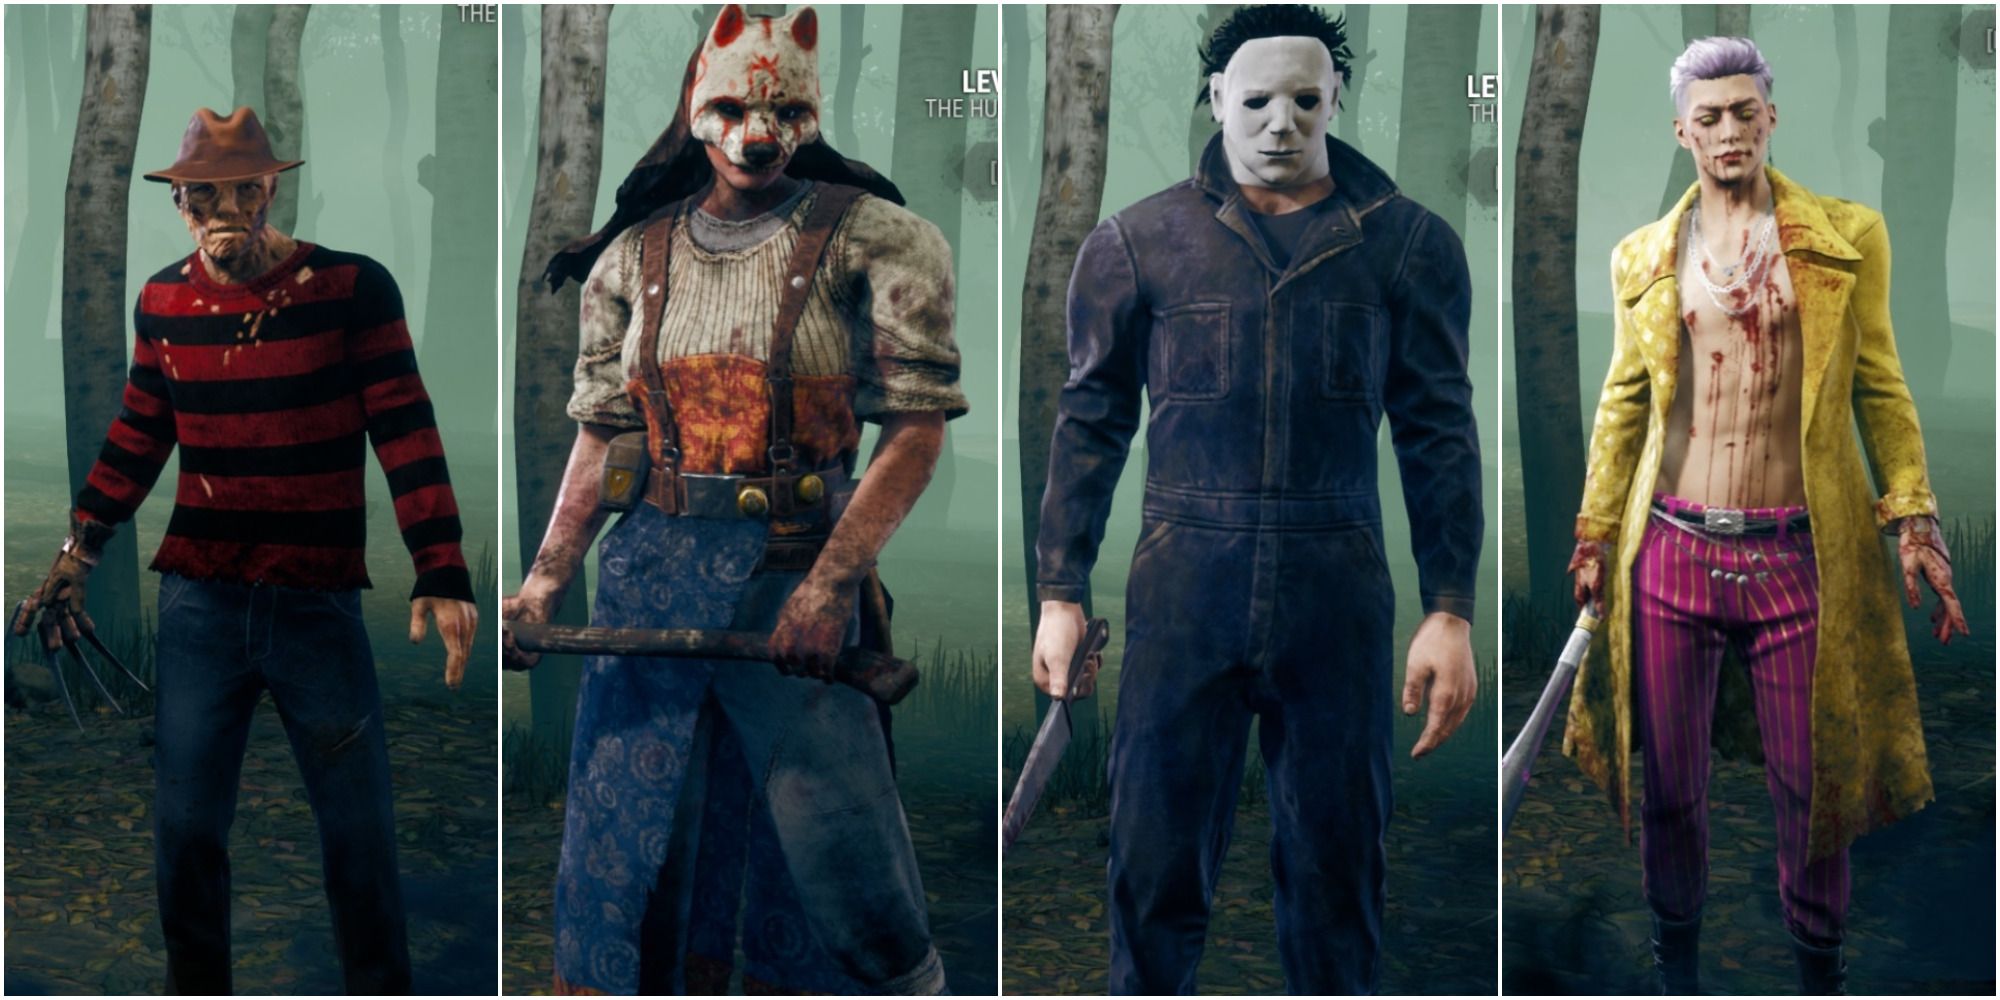 Left to right: The Nightmare, The Huntress, The Shape, The Trickster